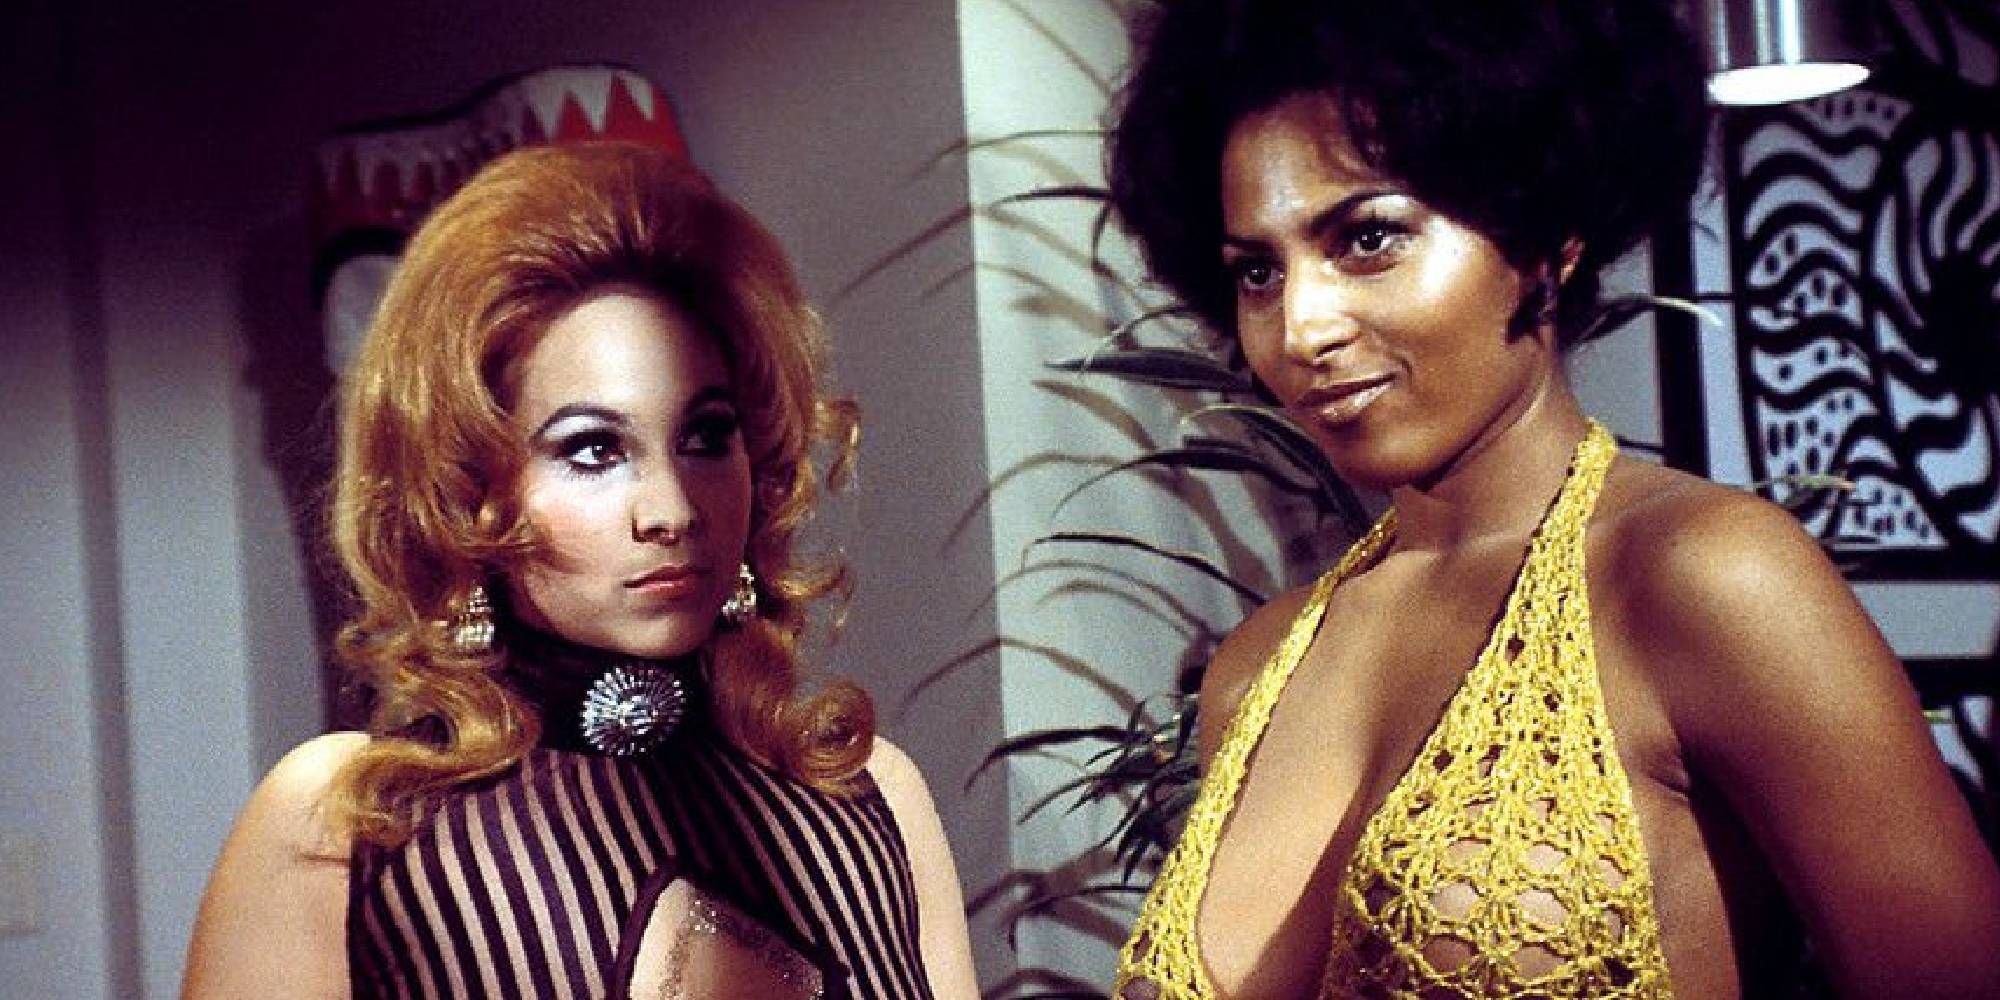 Pam Grier smiling in Beyond the Valley of the Dolls.